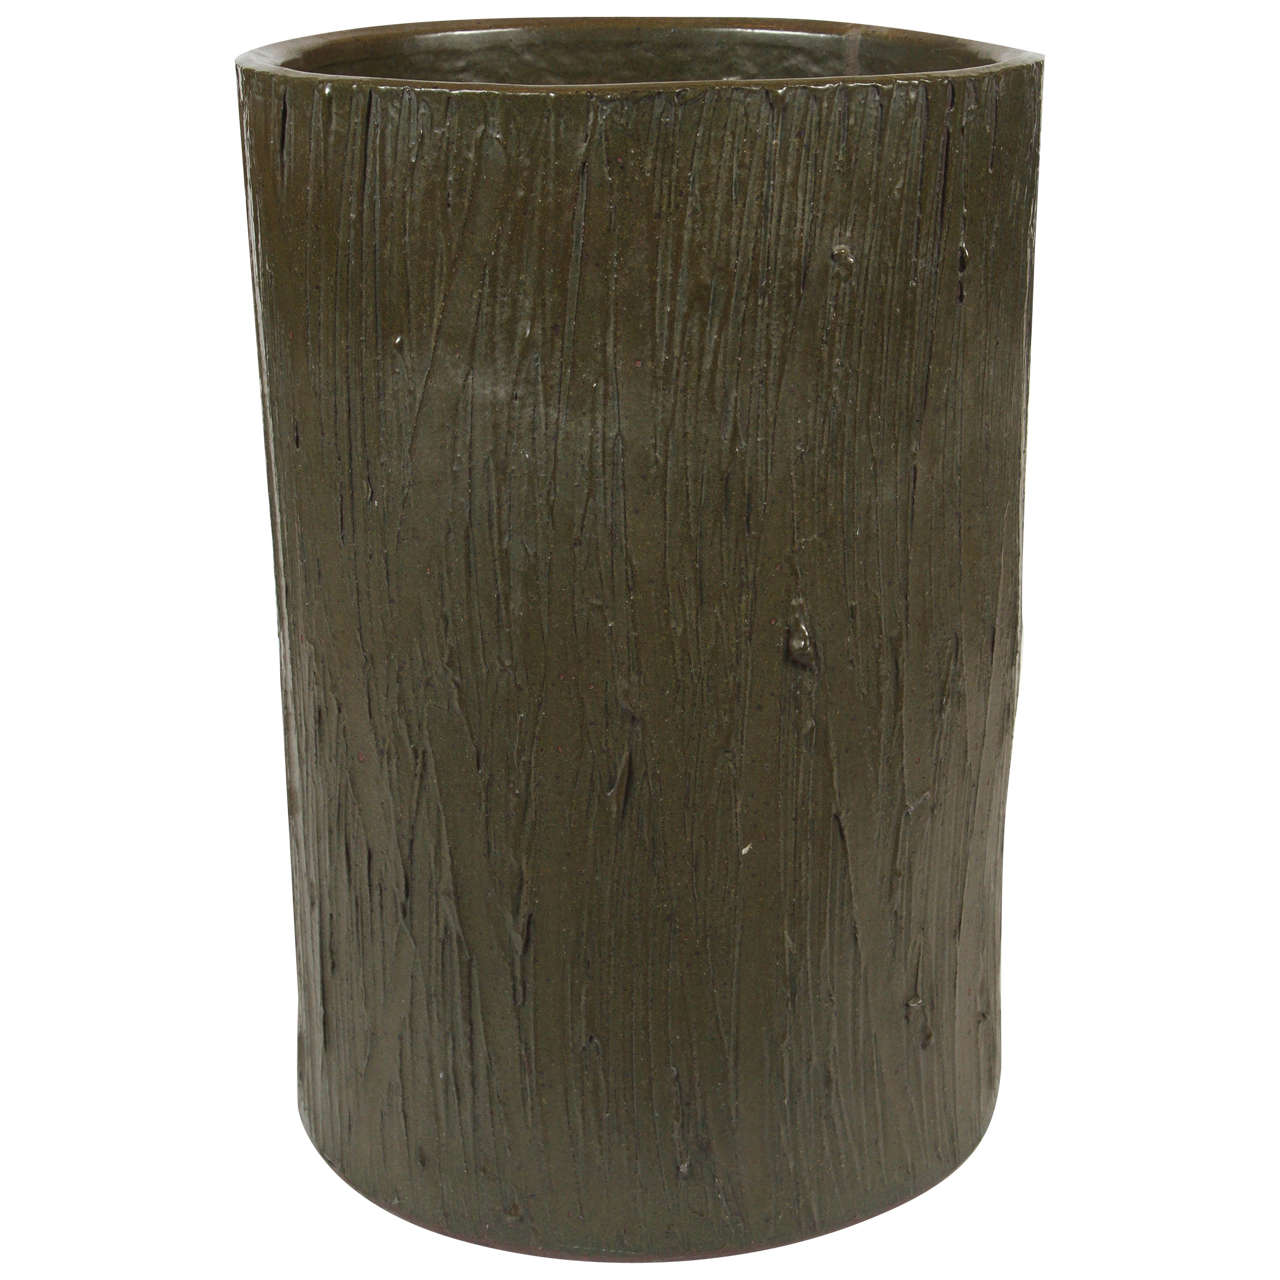 David Cressey for AP # 4030 Olive Glazed Planter with Linear Texture